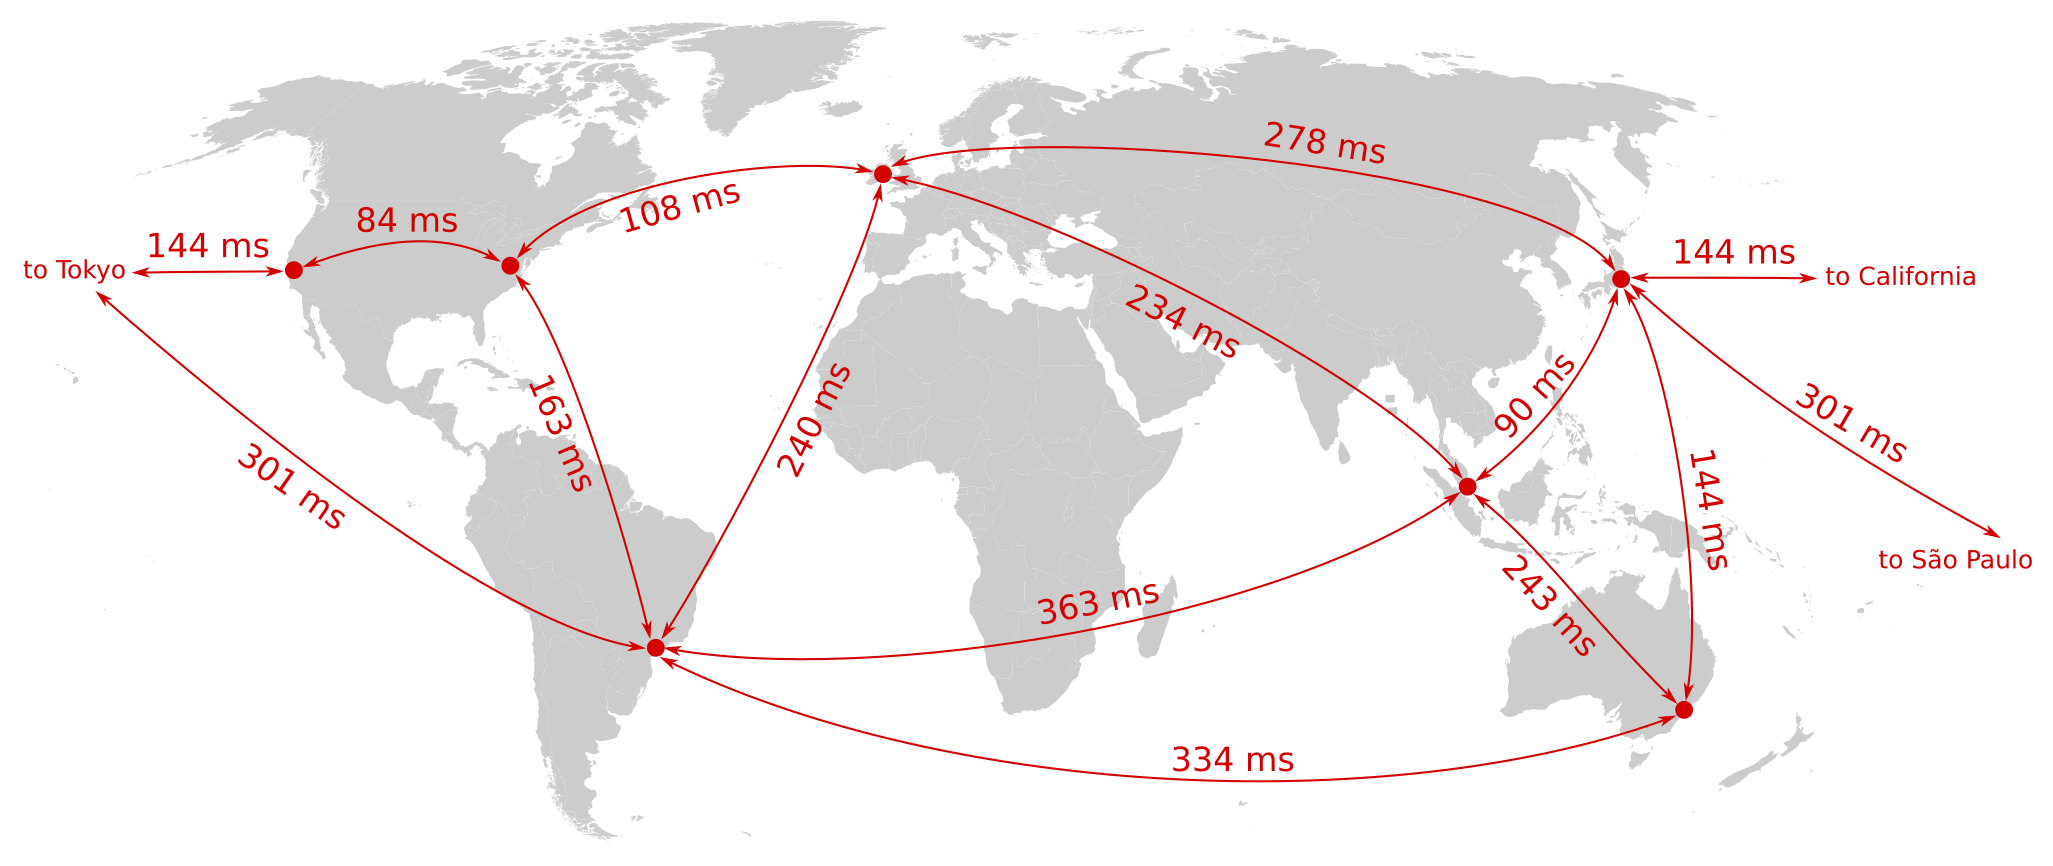 Server-to-server round-trip times between various locations worldwide